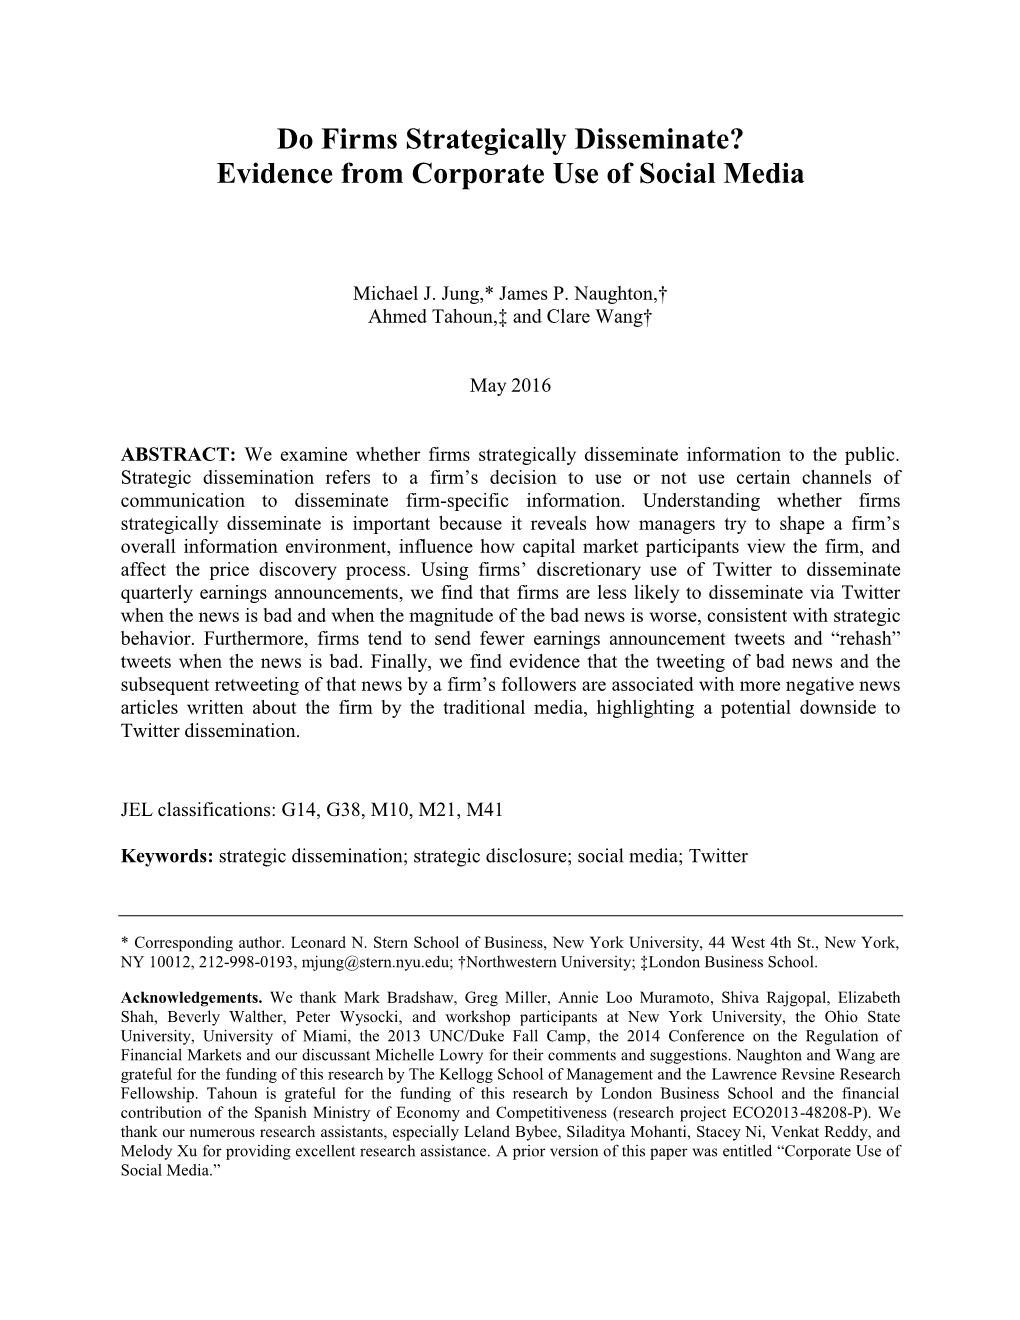 Do Firms Strategically Disseminate? Evidence from Corporate Use of Social Media